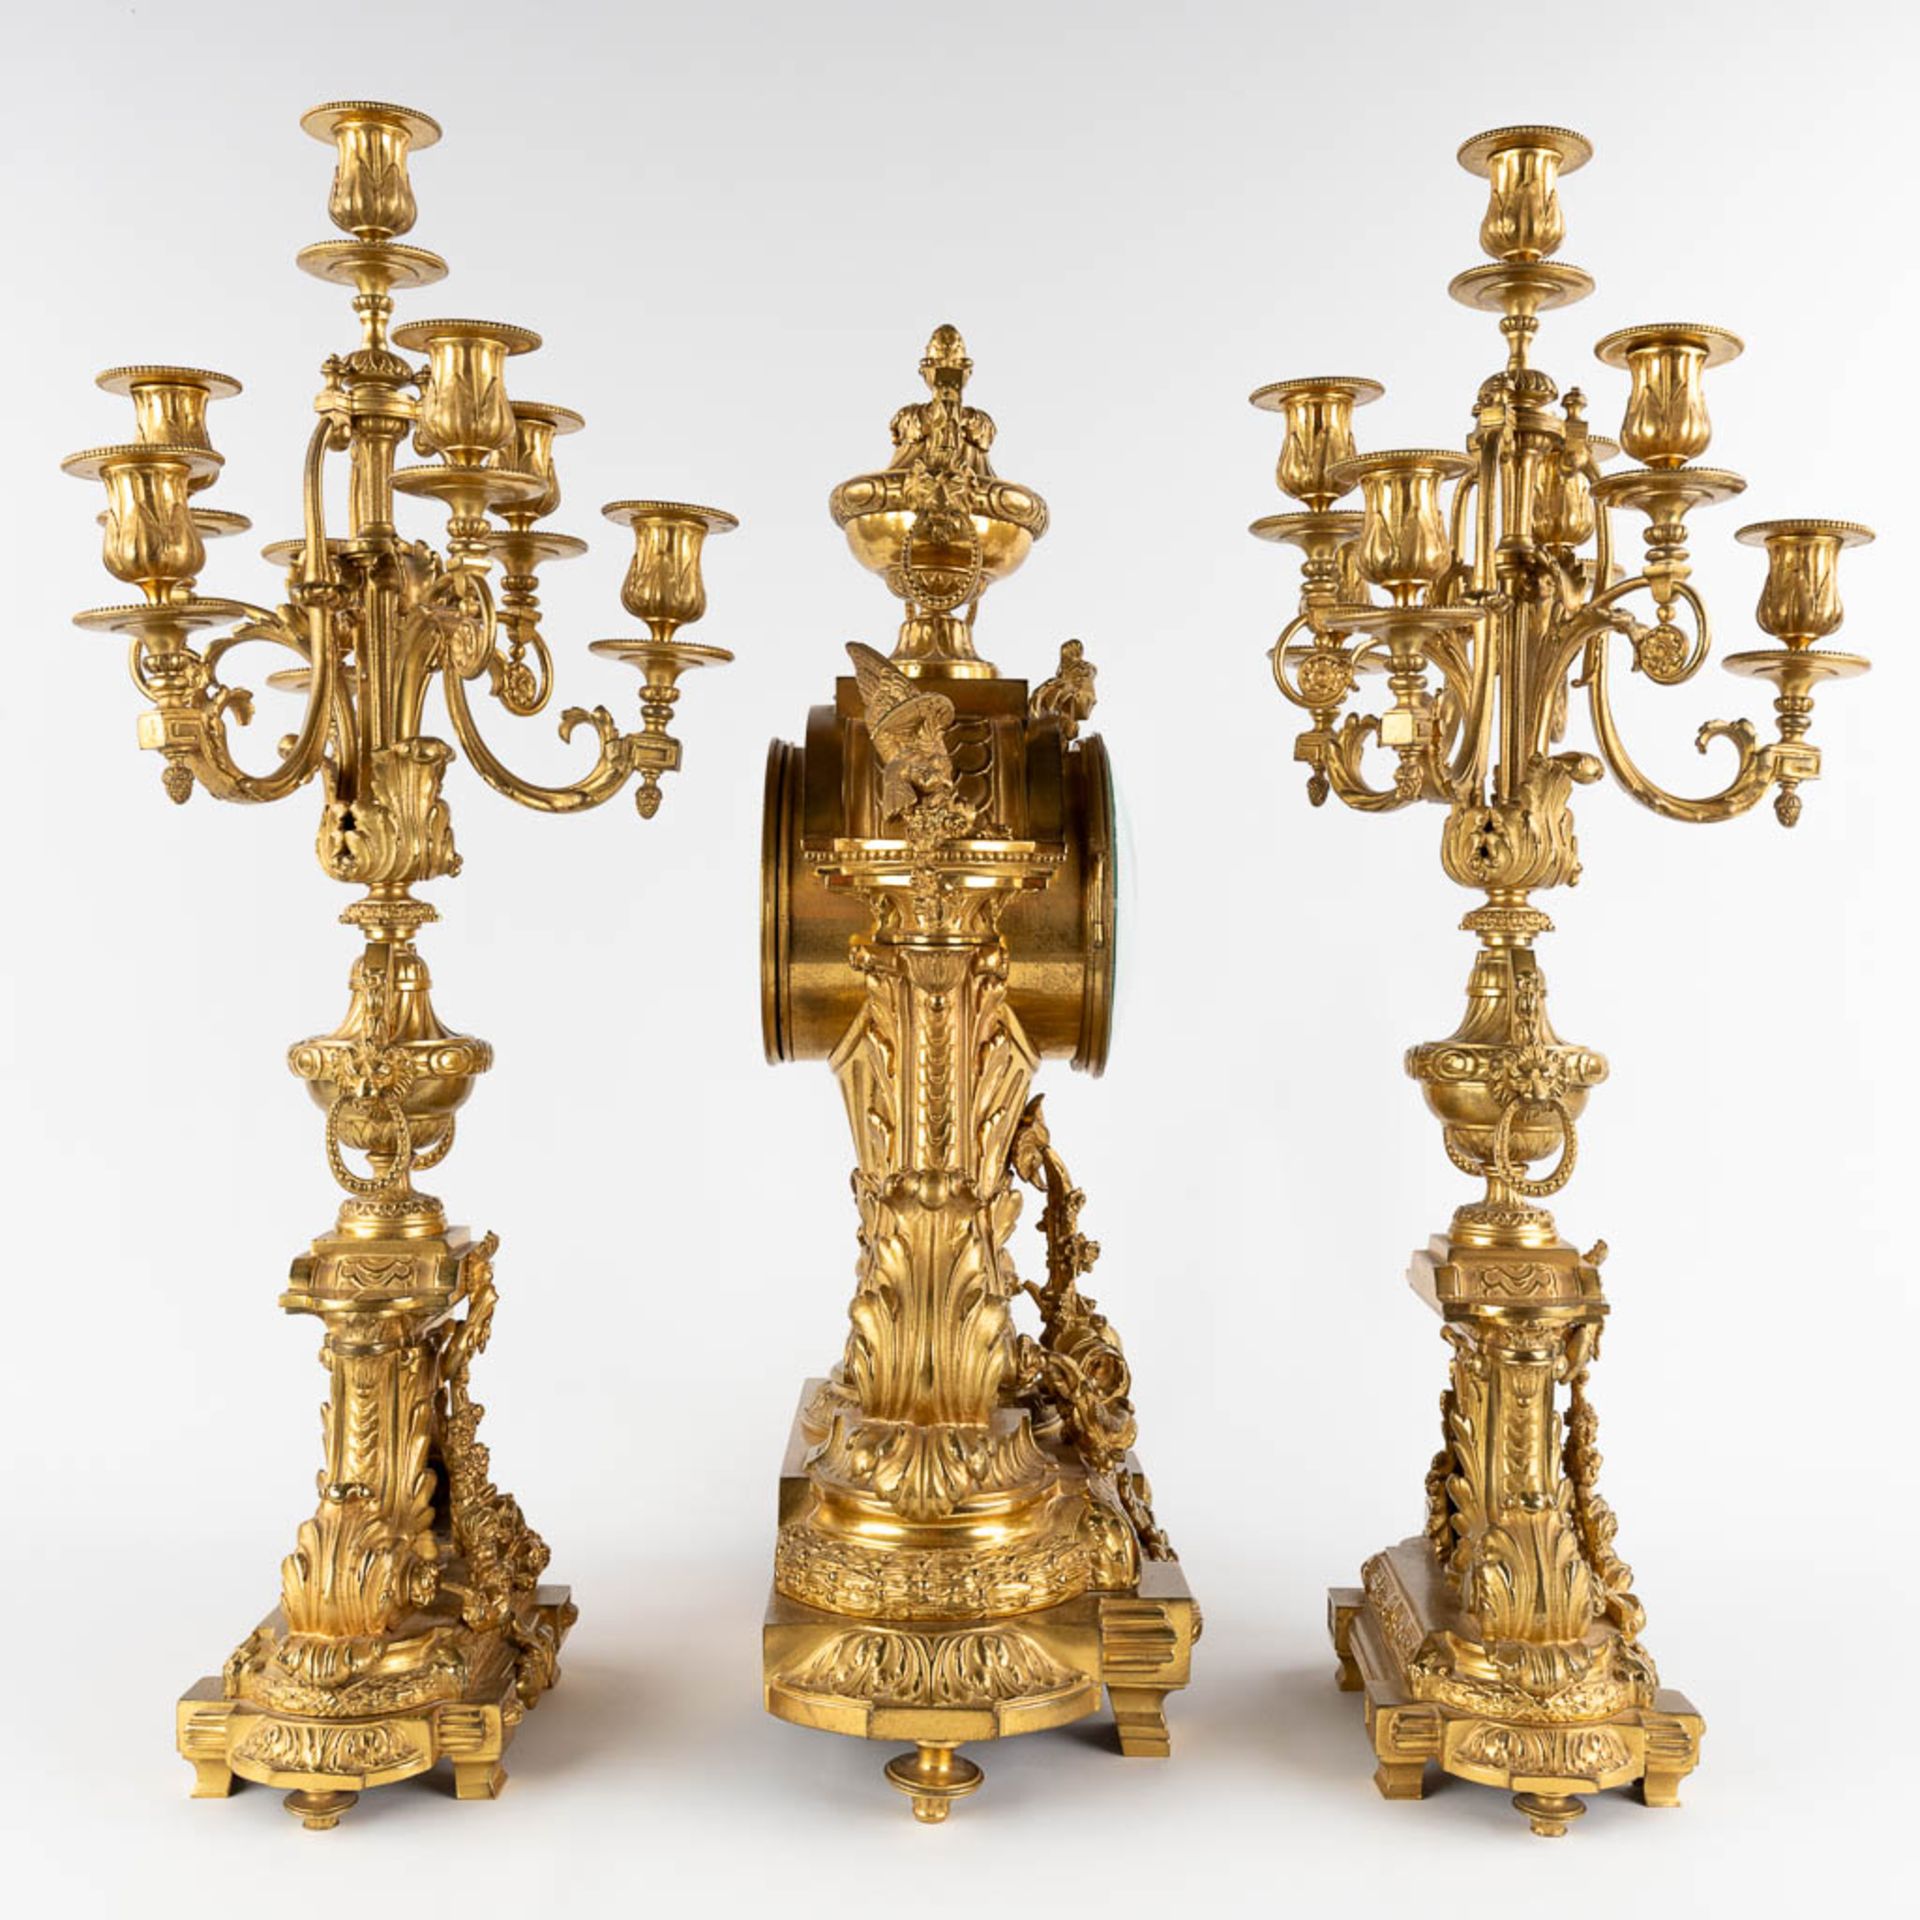 A three-piece mantle garniture clock and candelabra, gilt bronze in a Louis XVI style, 19th C. (D:19 - Image 4 of 19